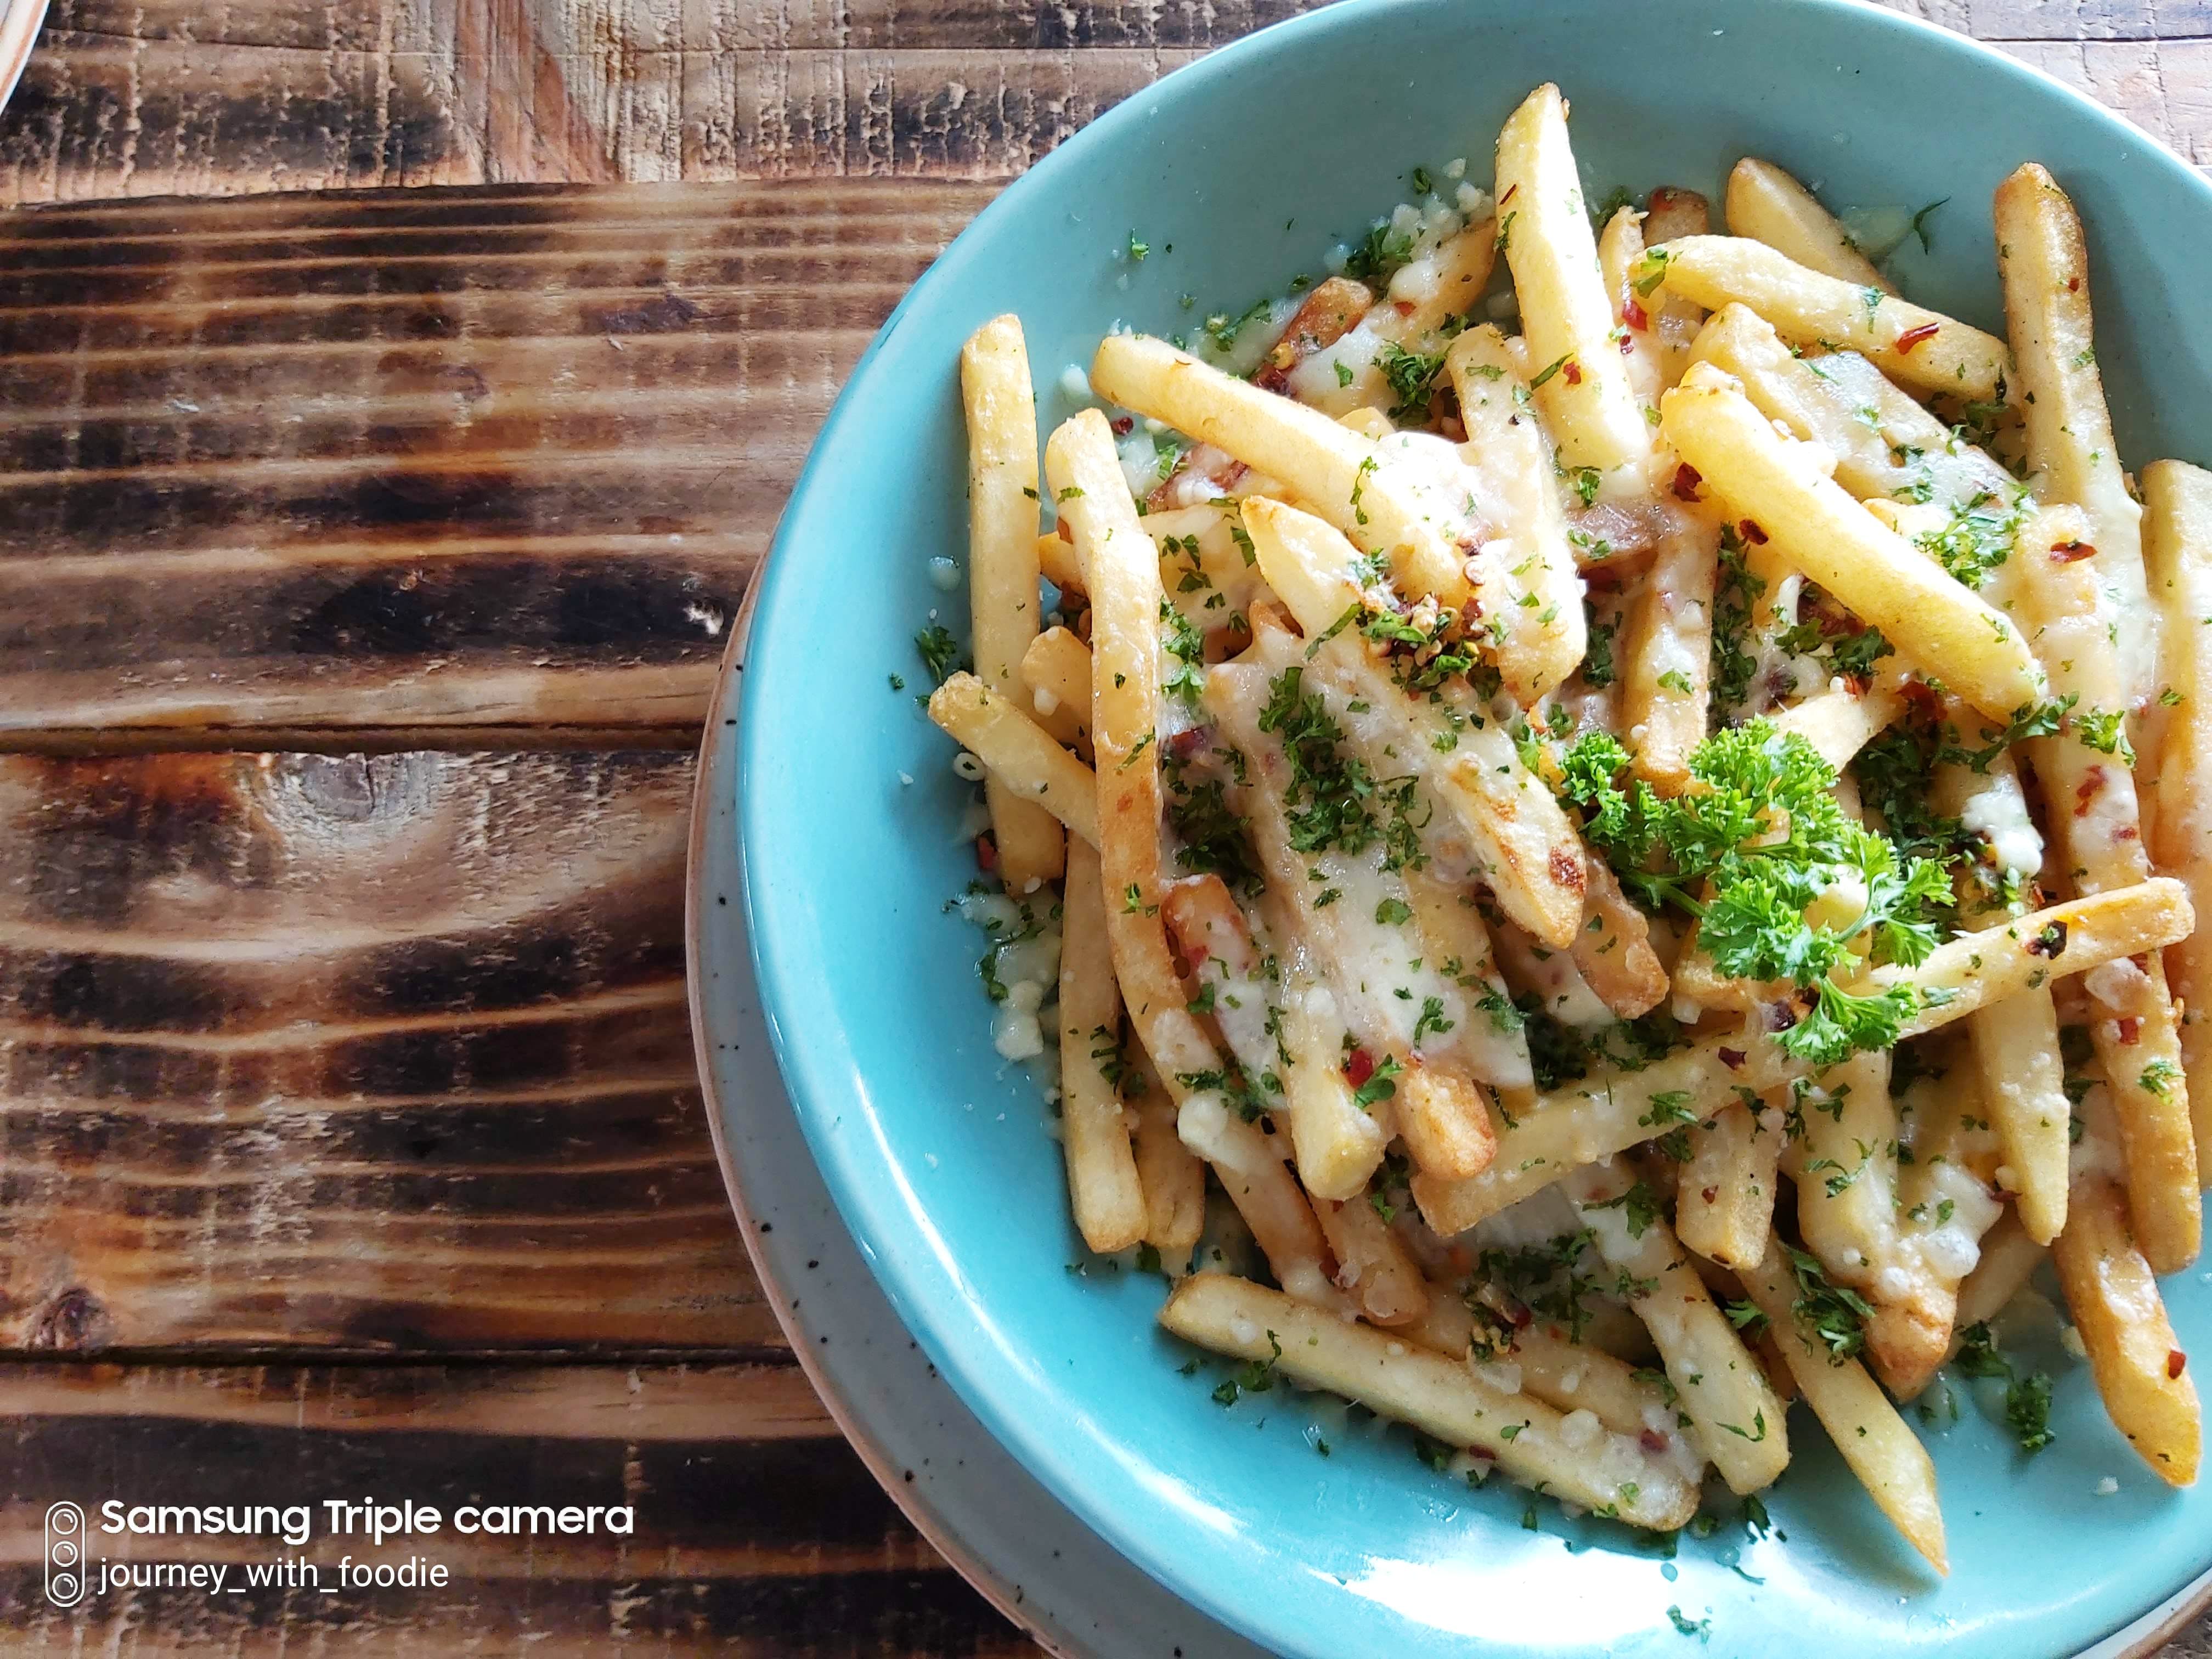 Dish,Food,Cuisine,Penne,Ingredient,Penne alla vodka,Produce,Comfort food,Staple food,French fries